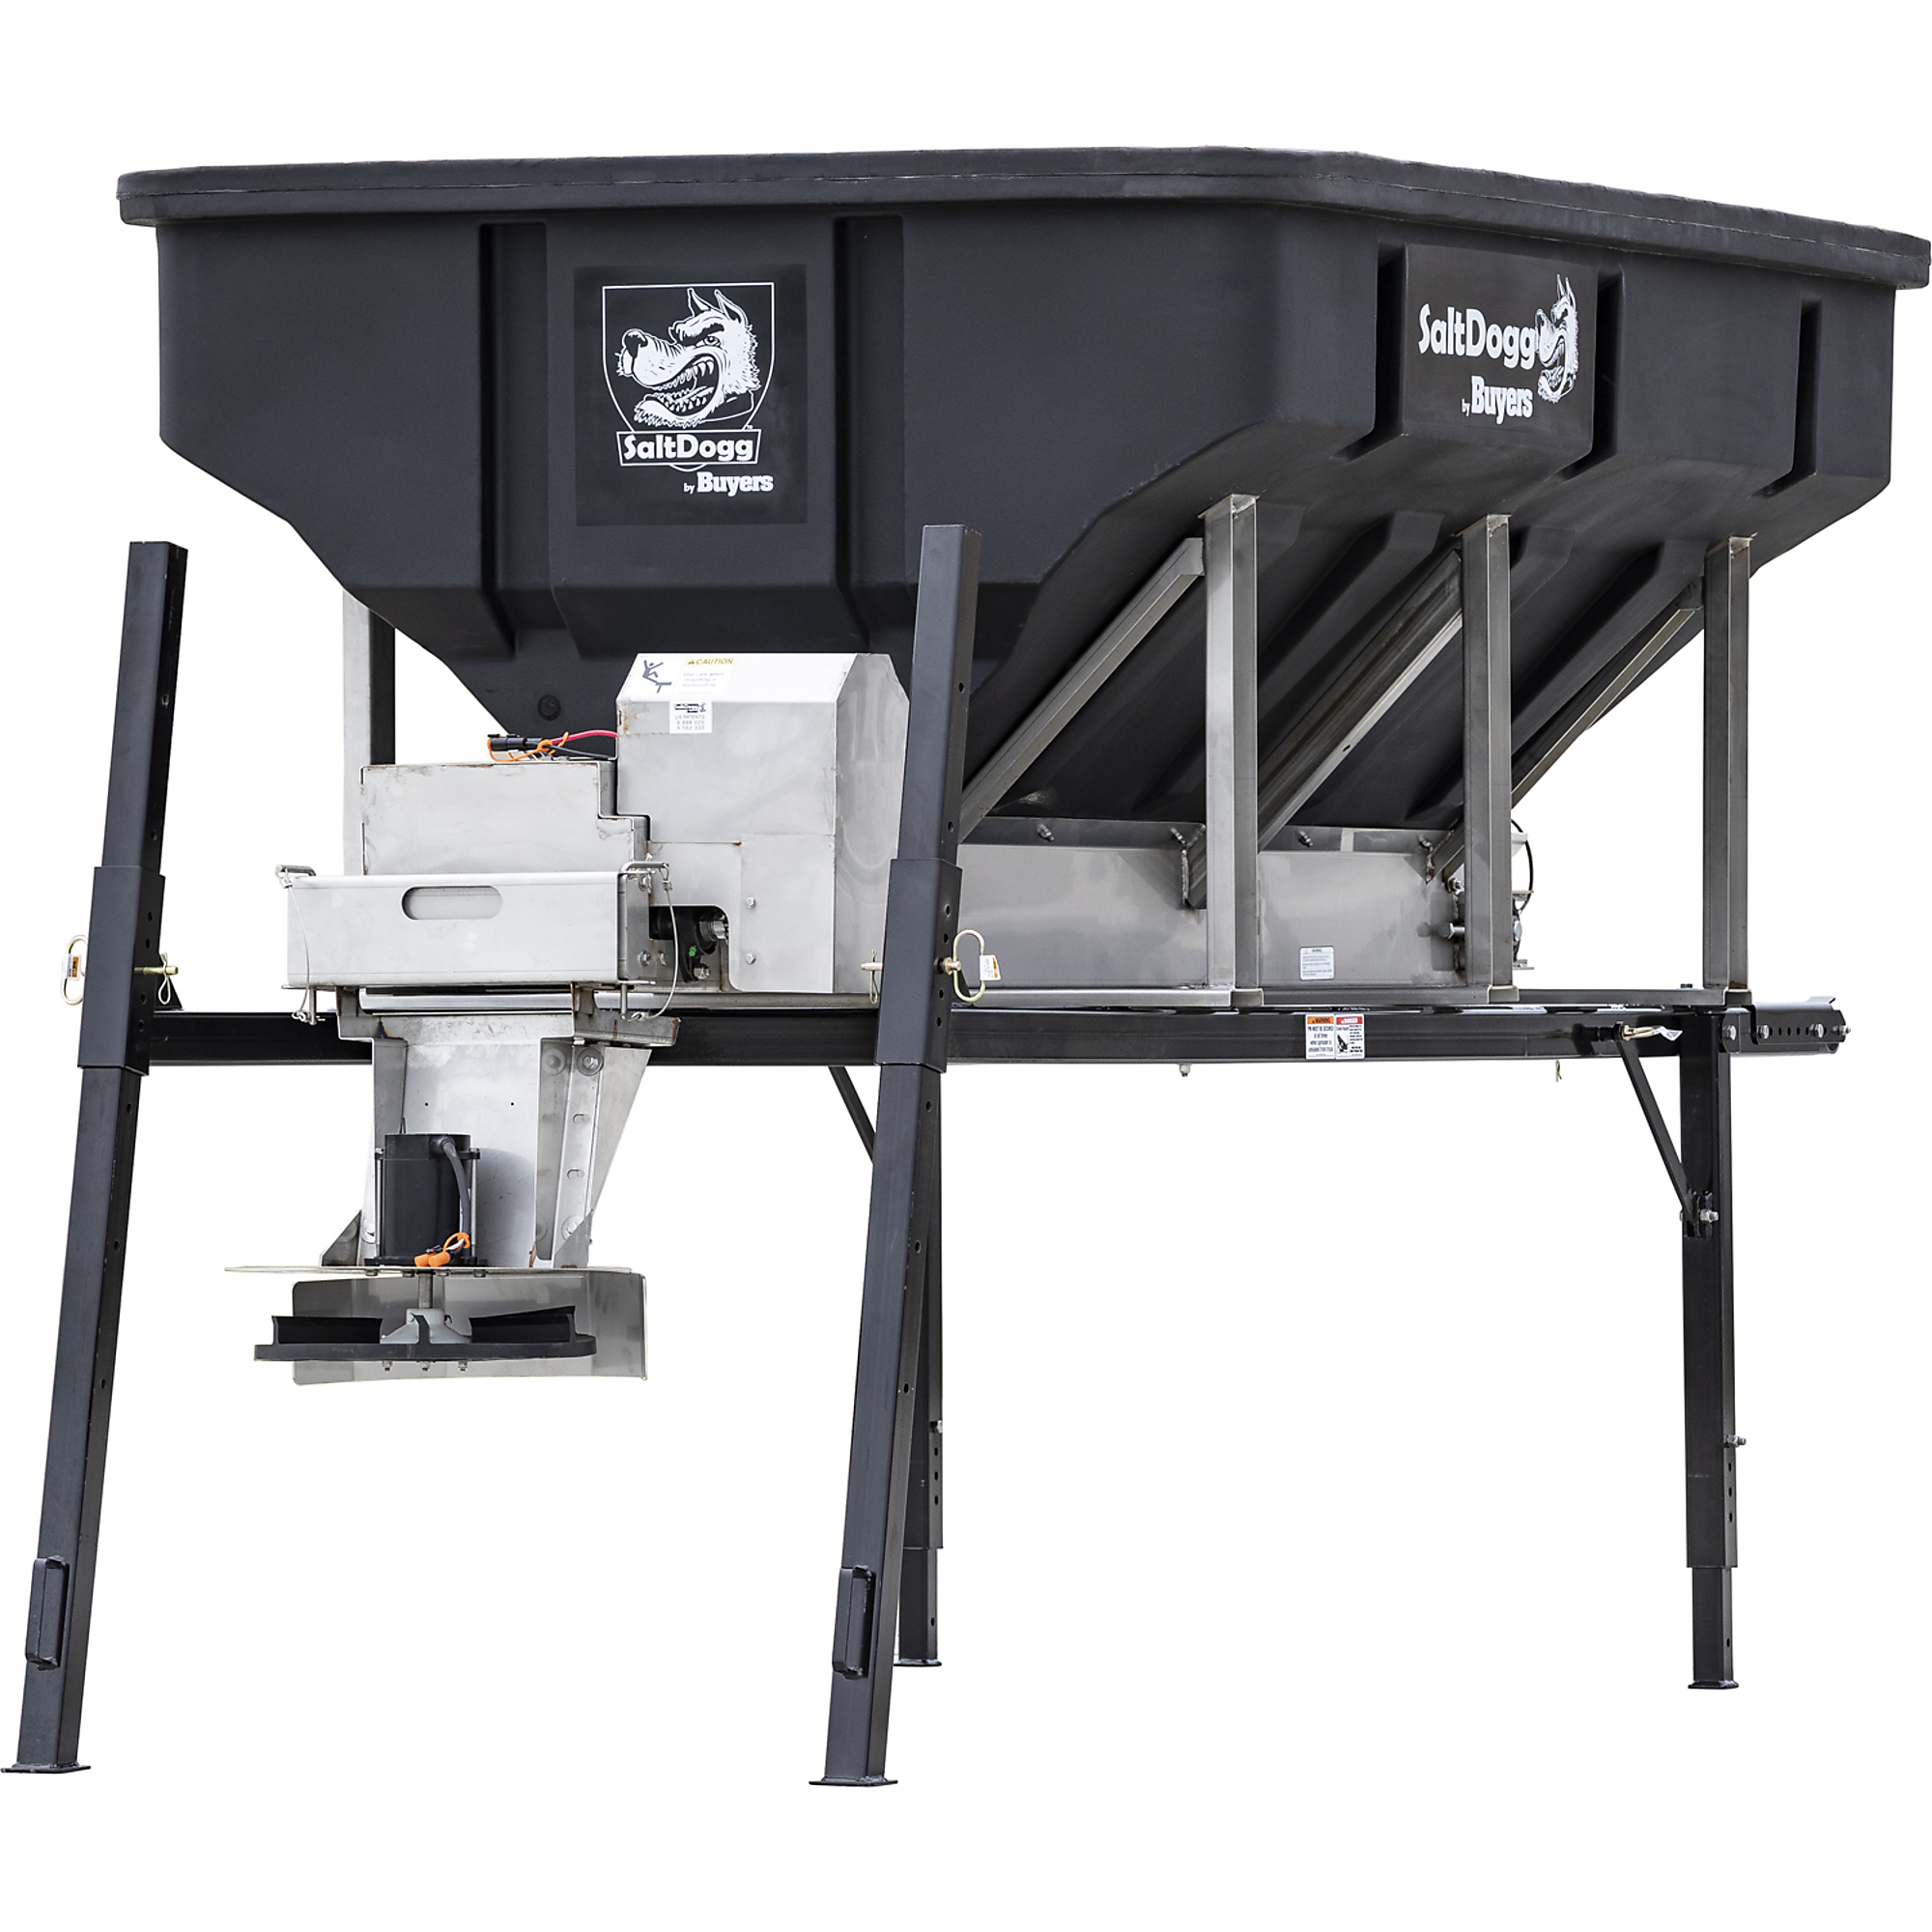 Buyers Products, Hydraulic Poly Hopper Spreader With Auger, Max. Spread Width 30 ft, Model PRO4000H